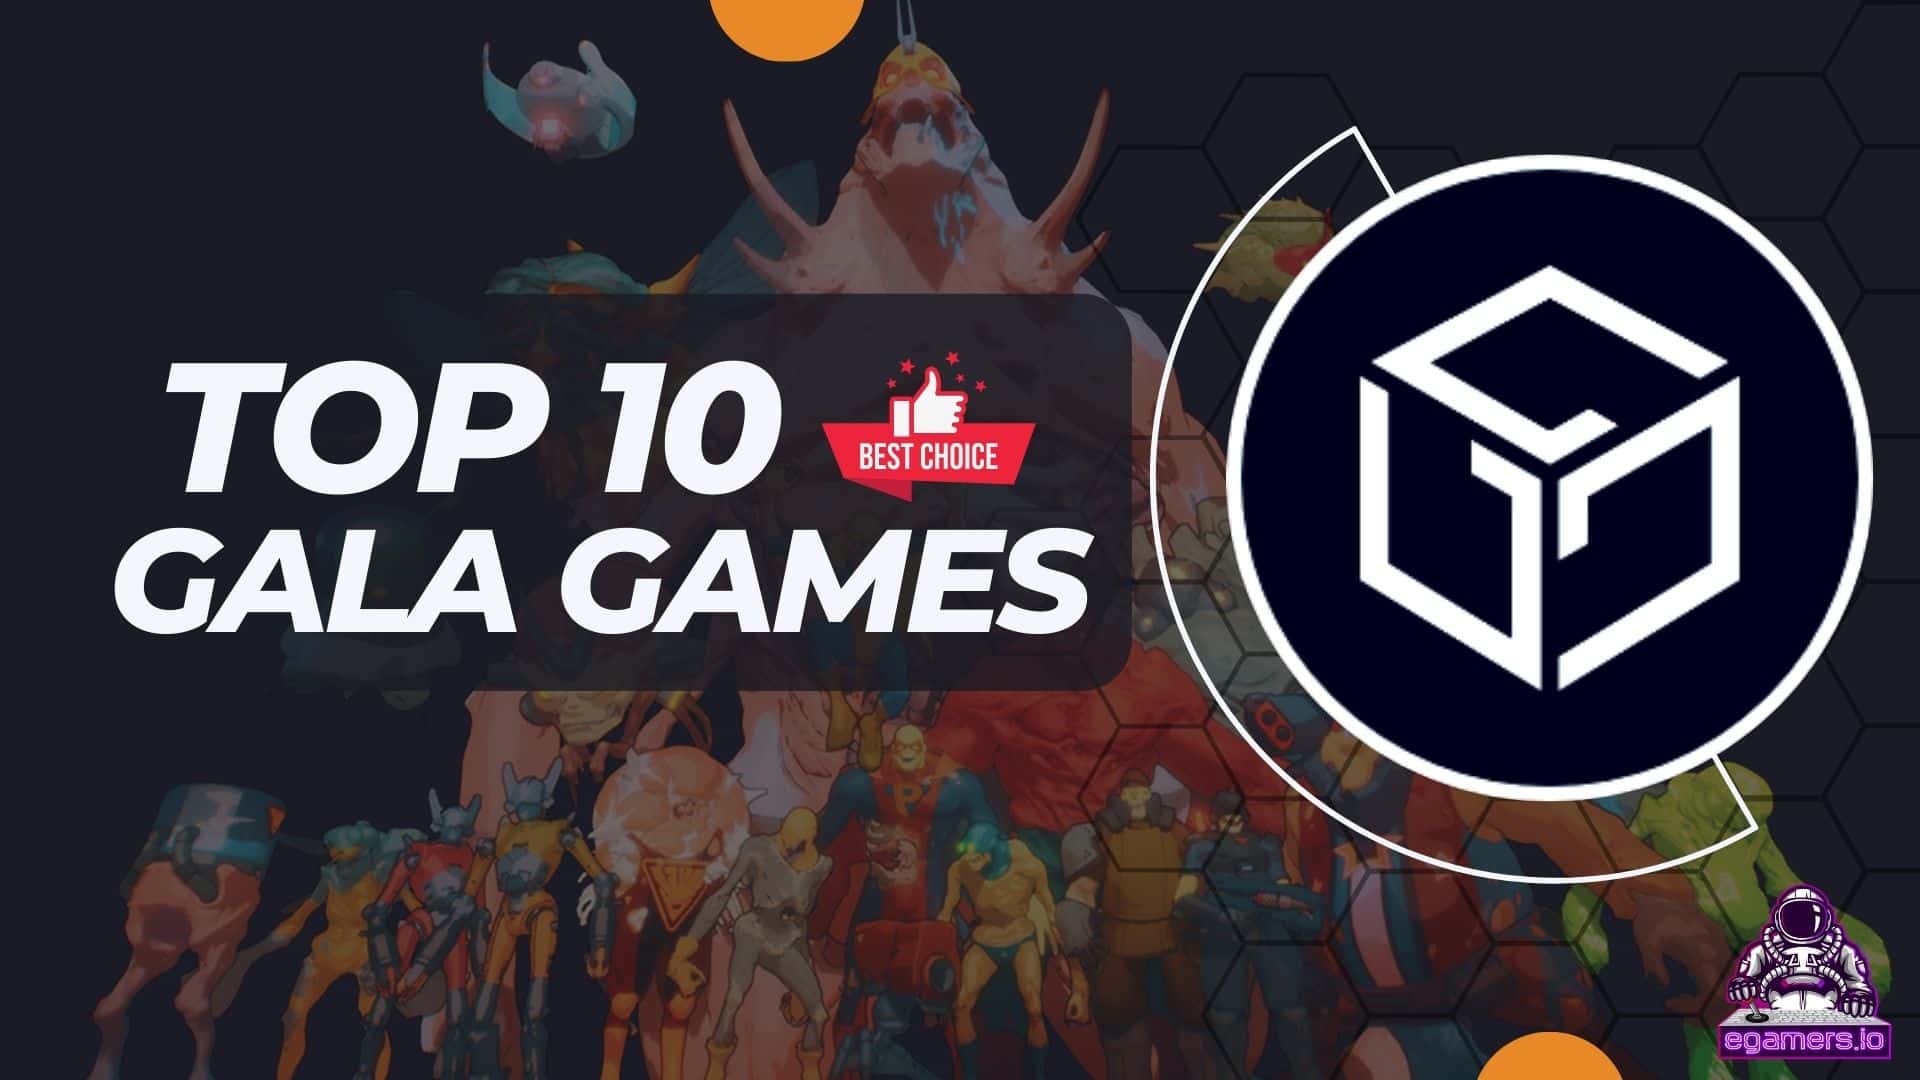 TOP 10 NFT games without investment